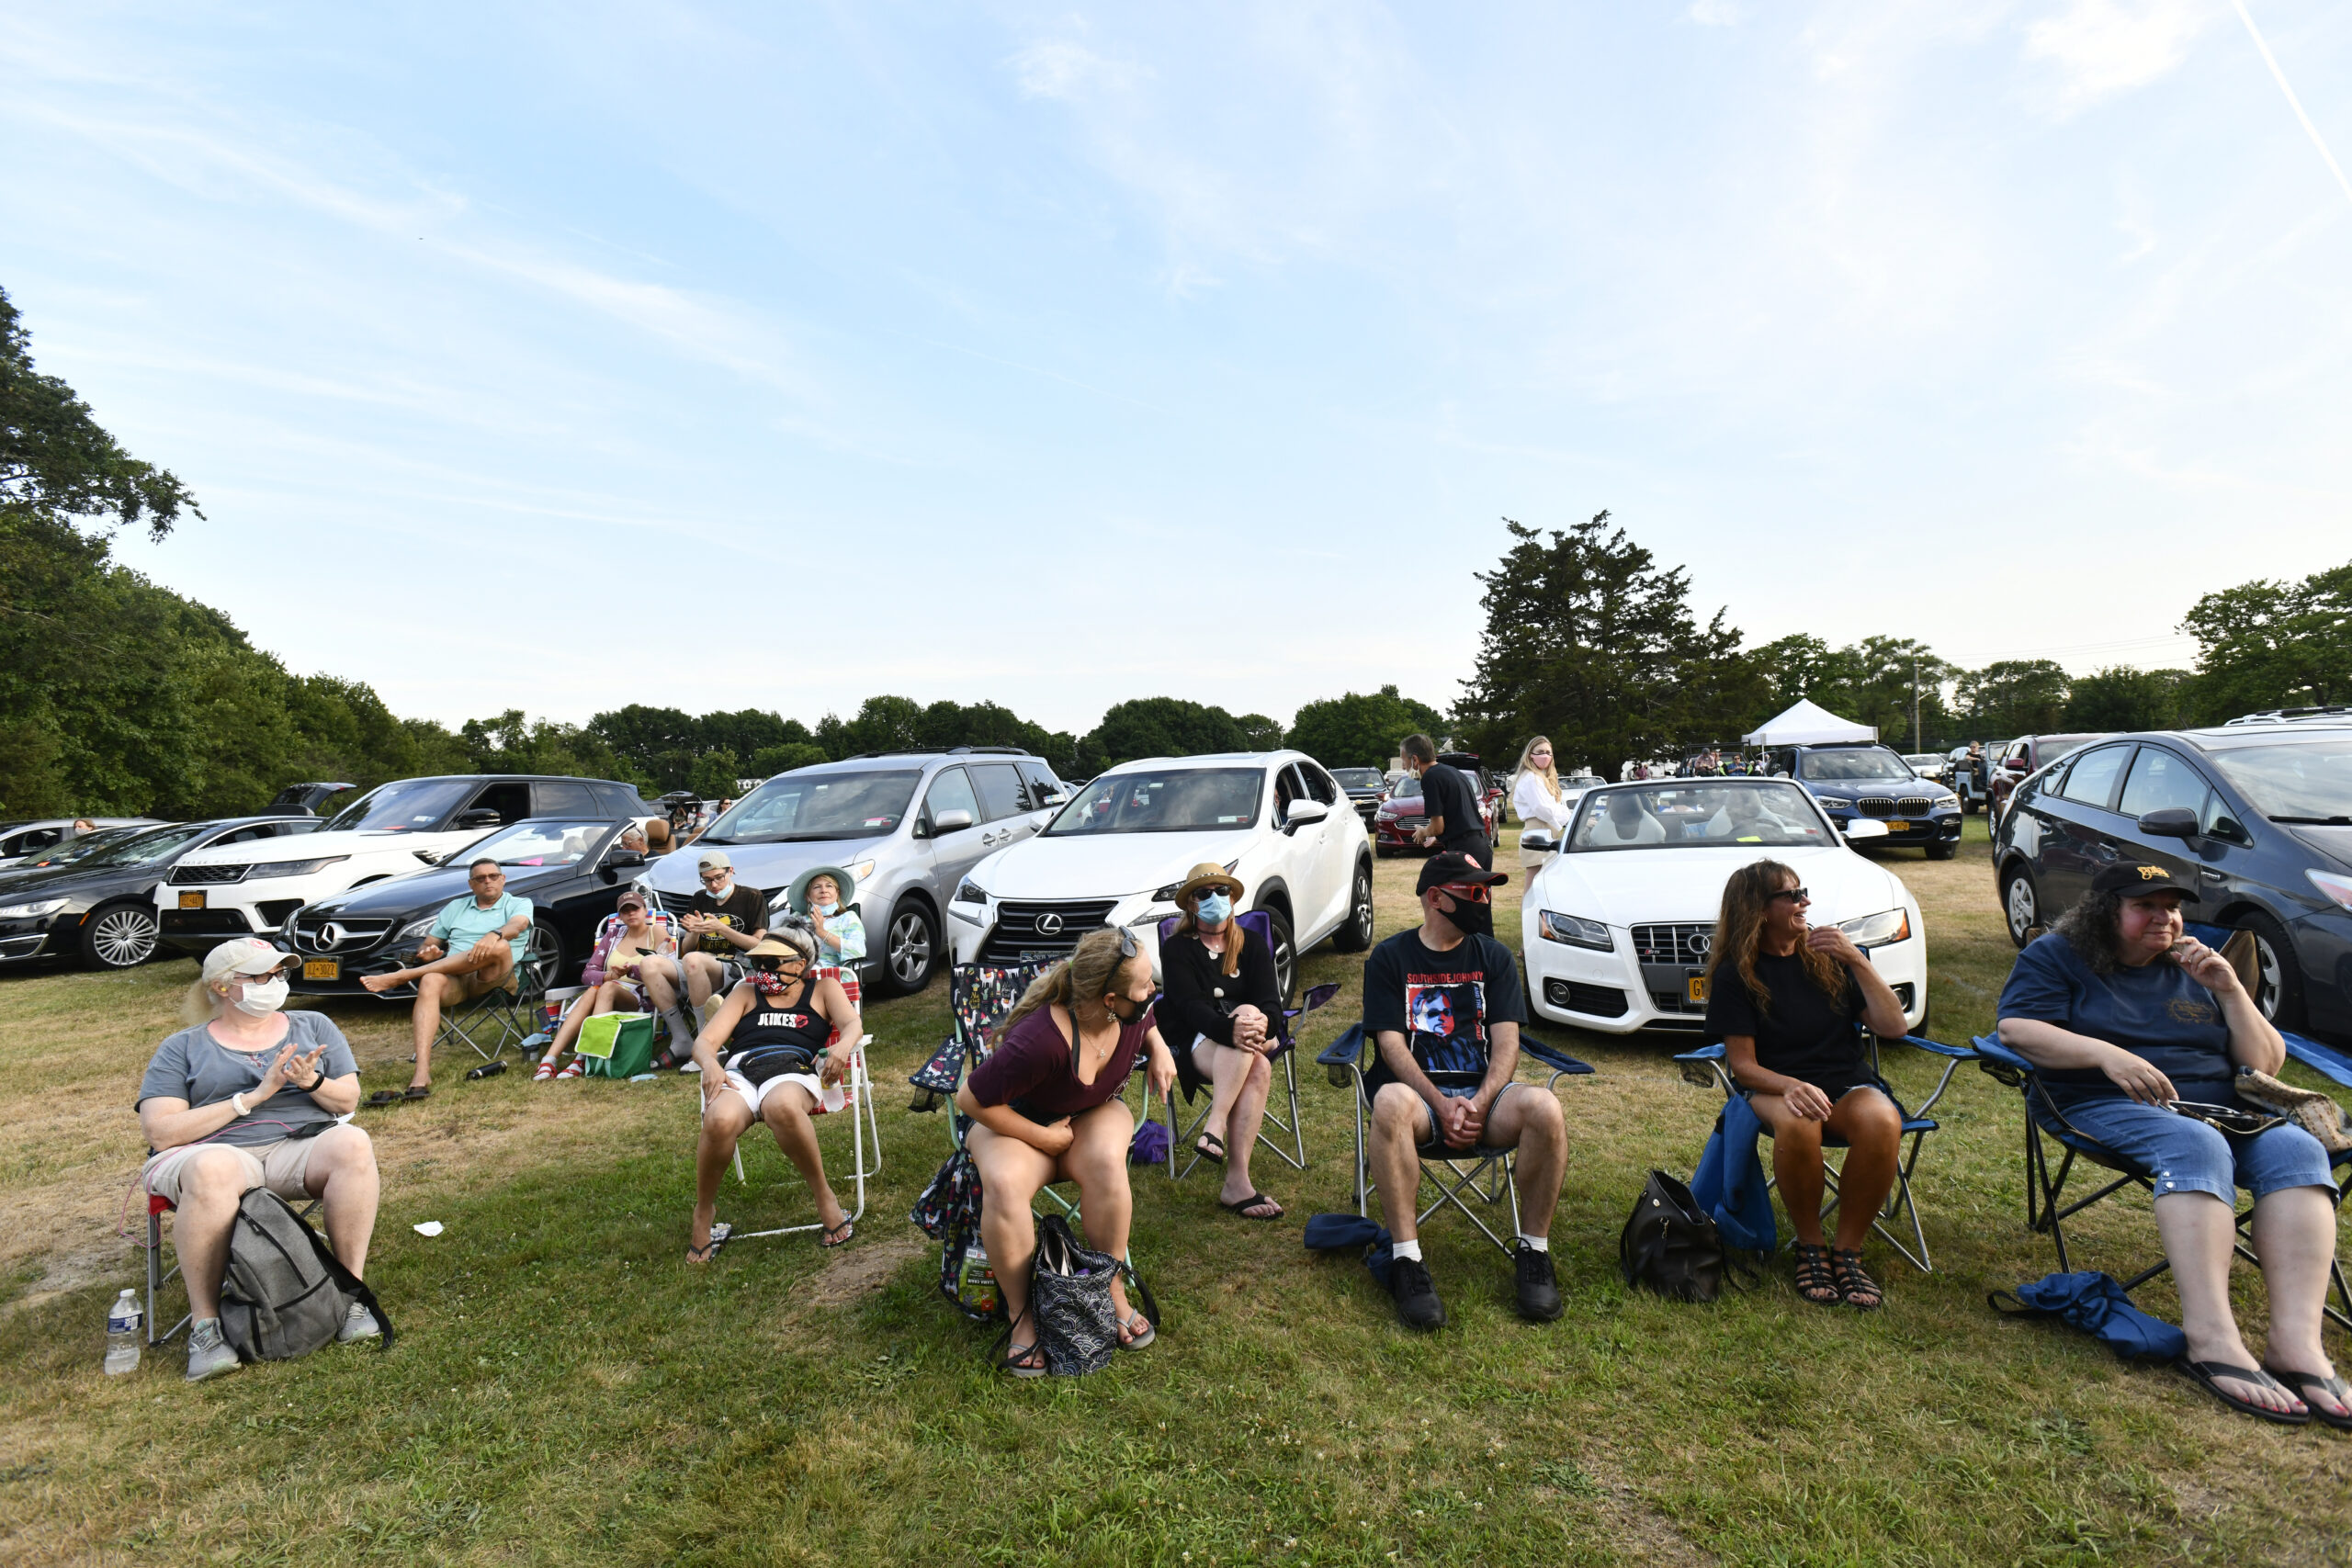 COVID 19 changed the way we Watched concerts. Like this one in Westhampton Beach in 2020.